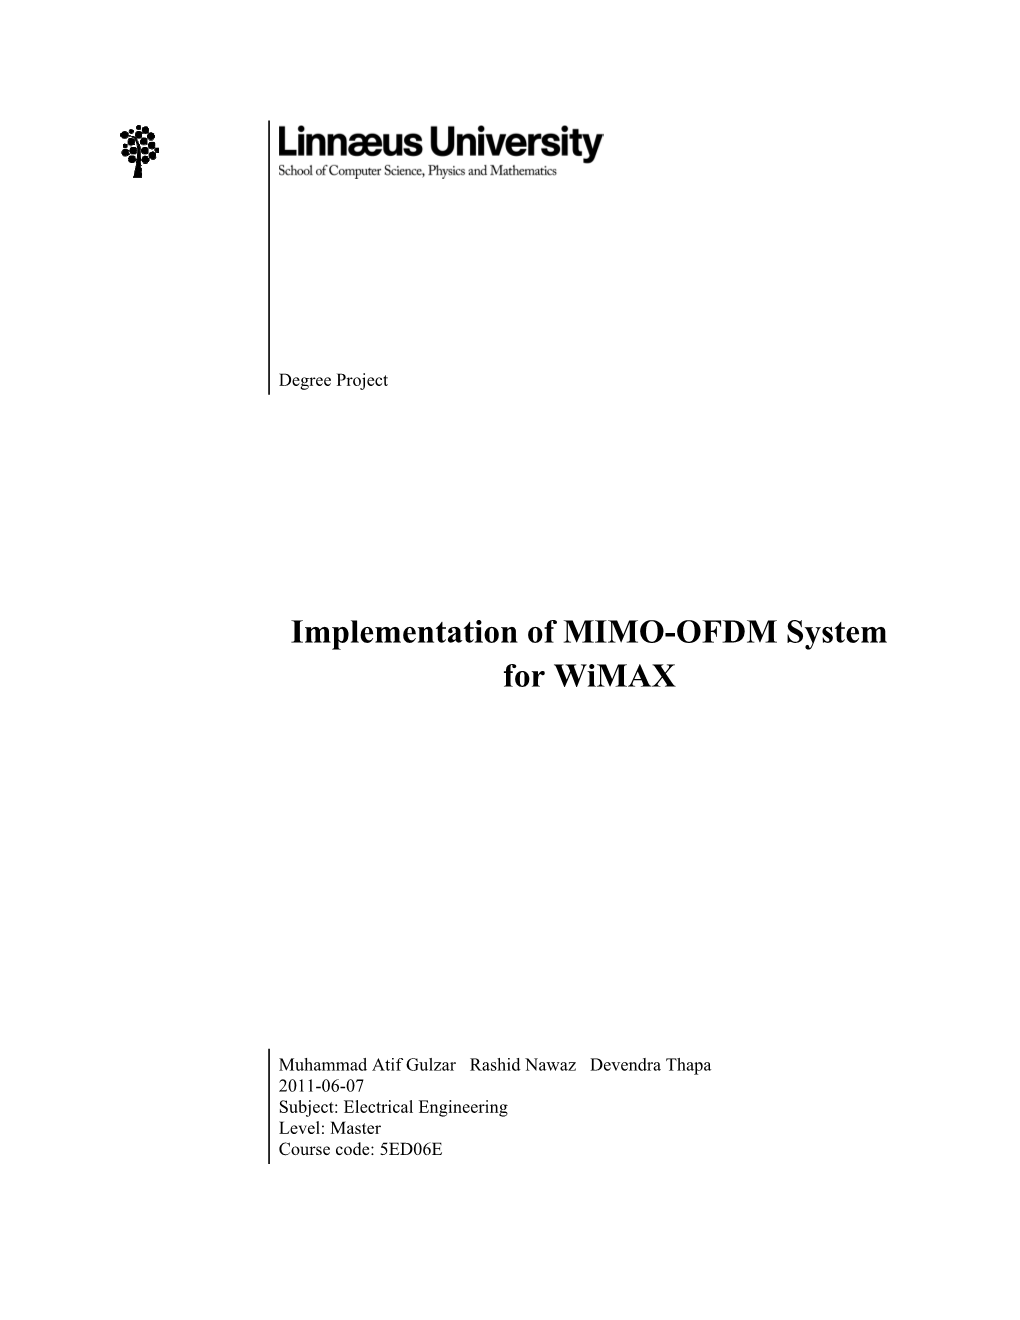 Implementation of MIMO-OFDM System for Wimax